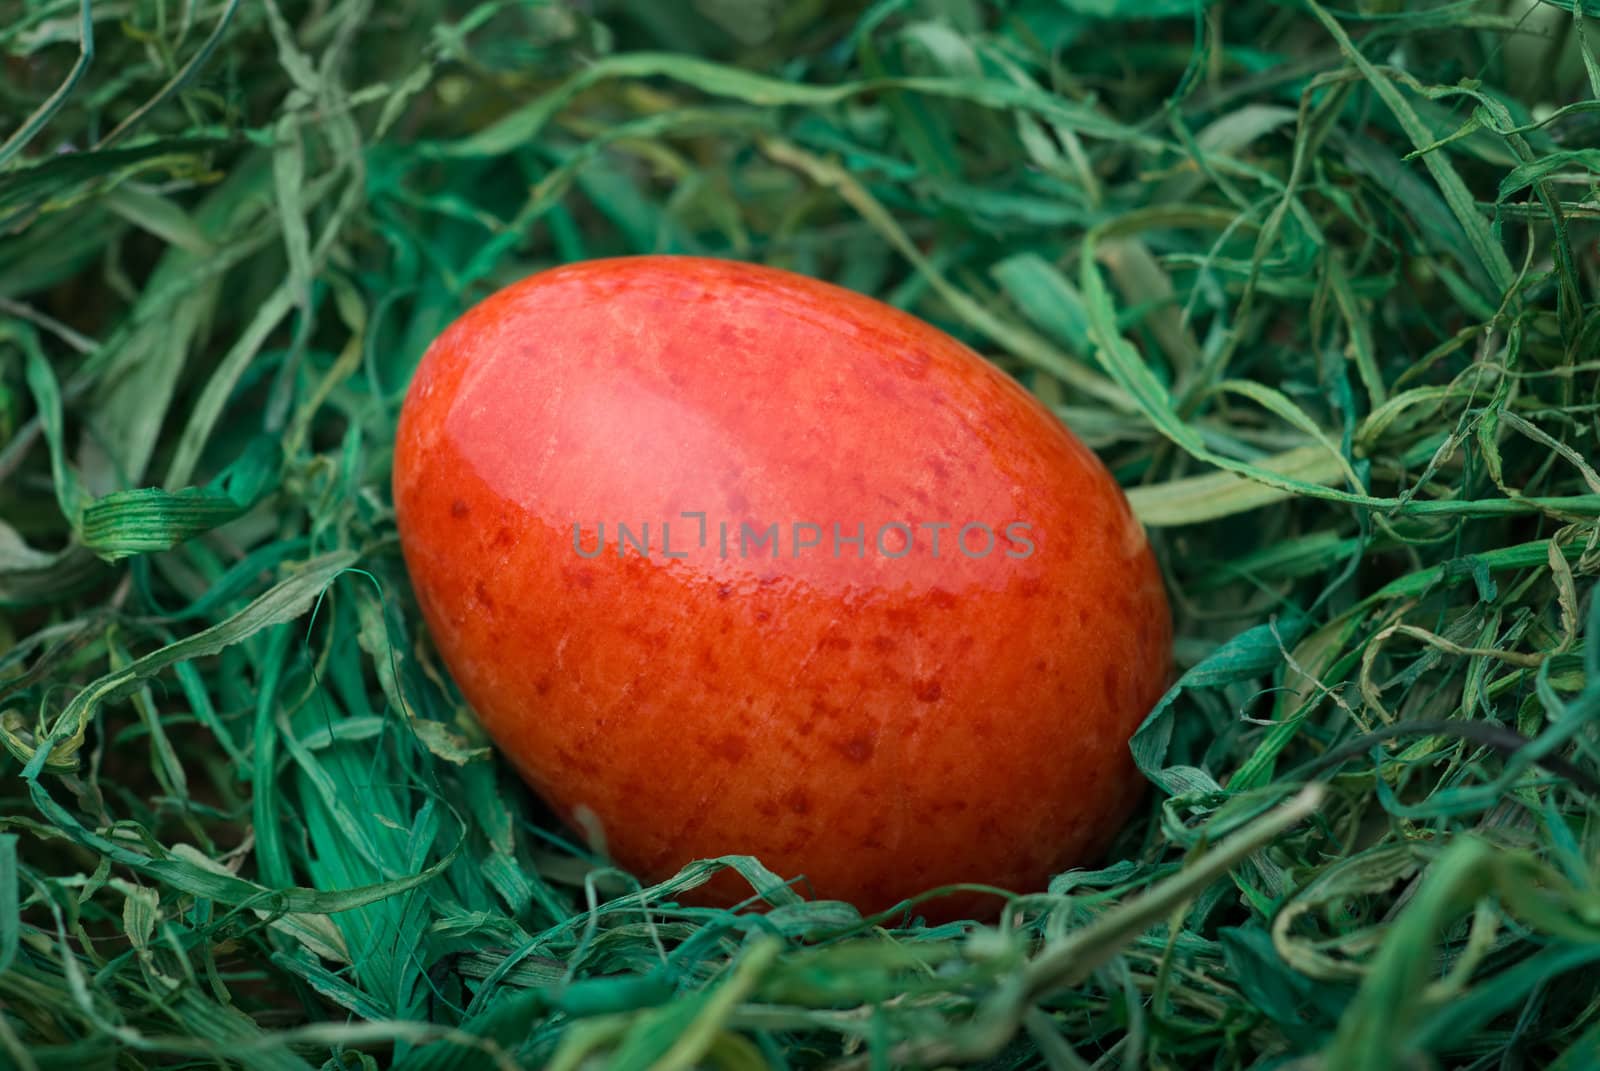 Red easter egg on the green hay. Selective focus, shallow depth of field.